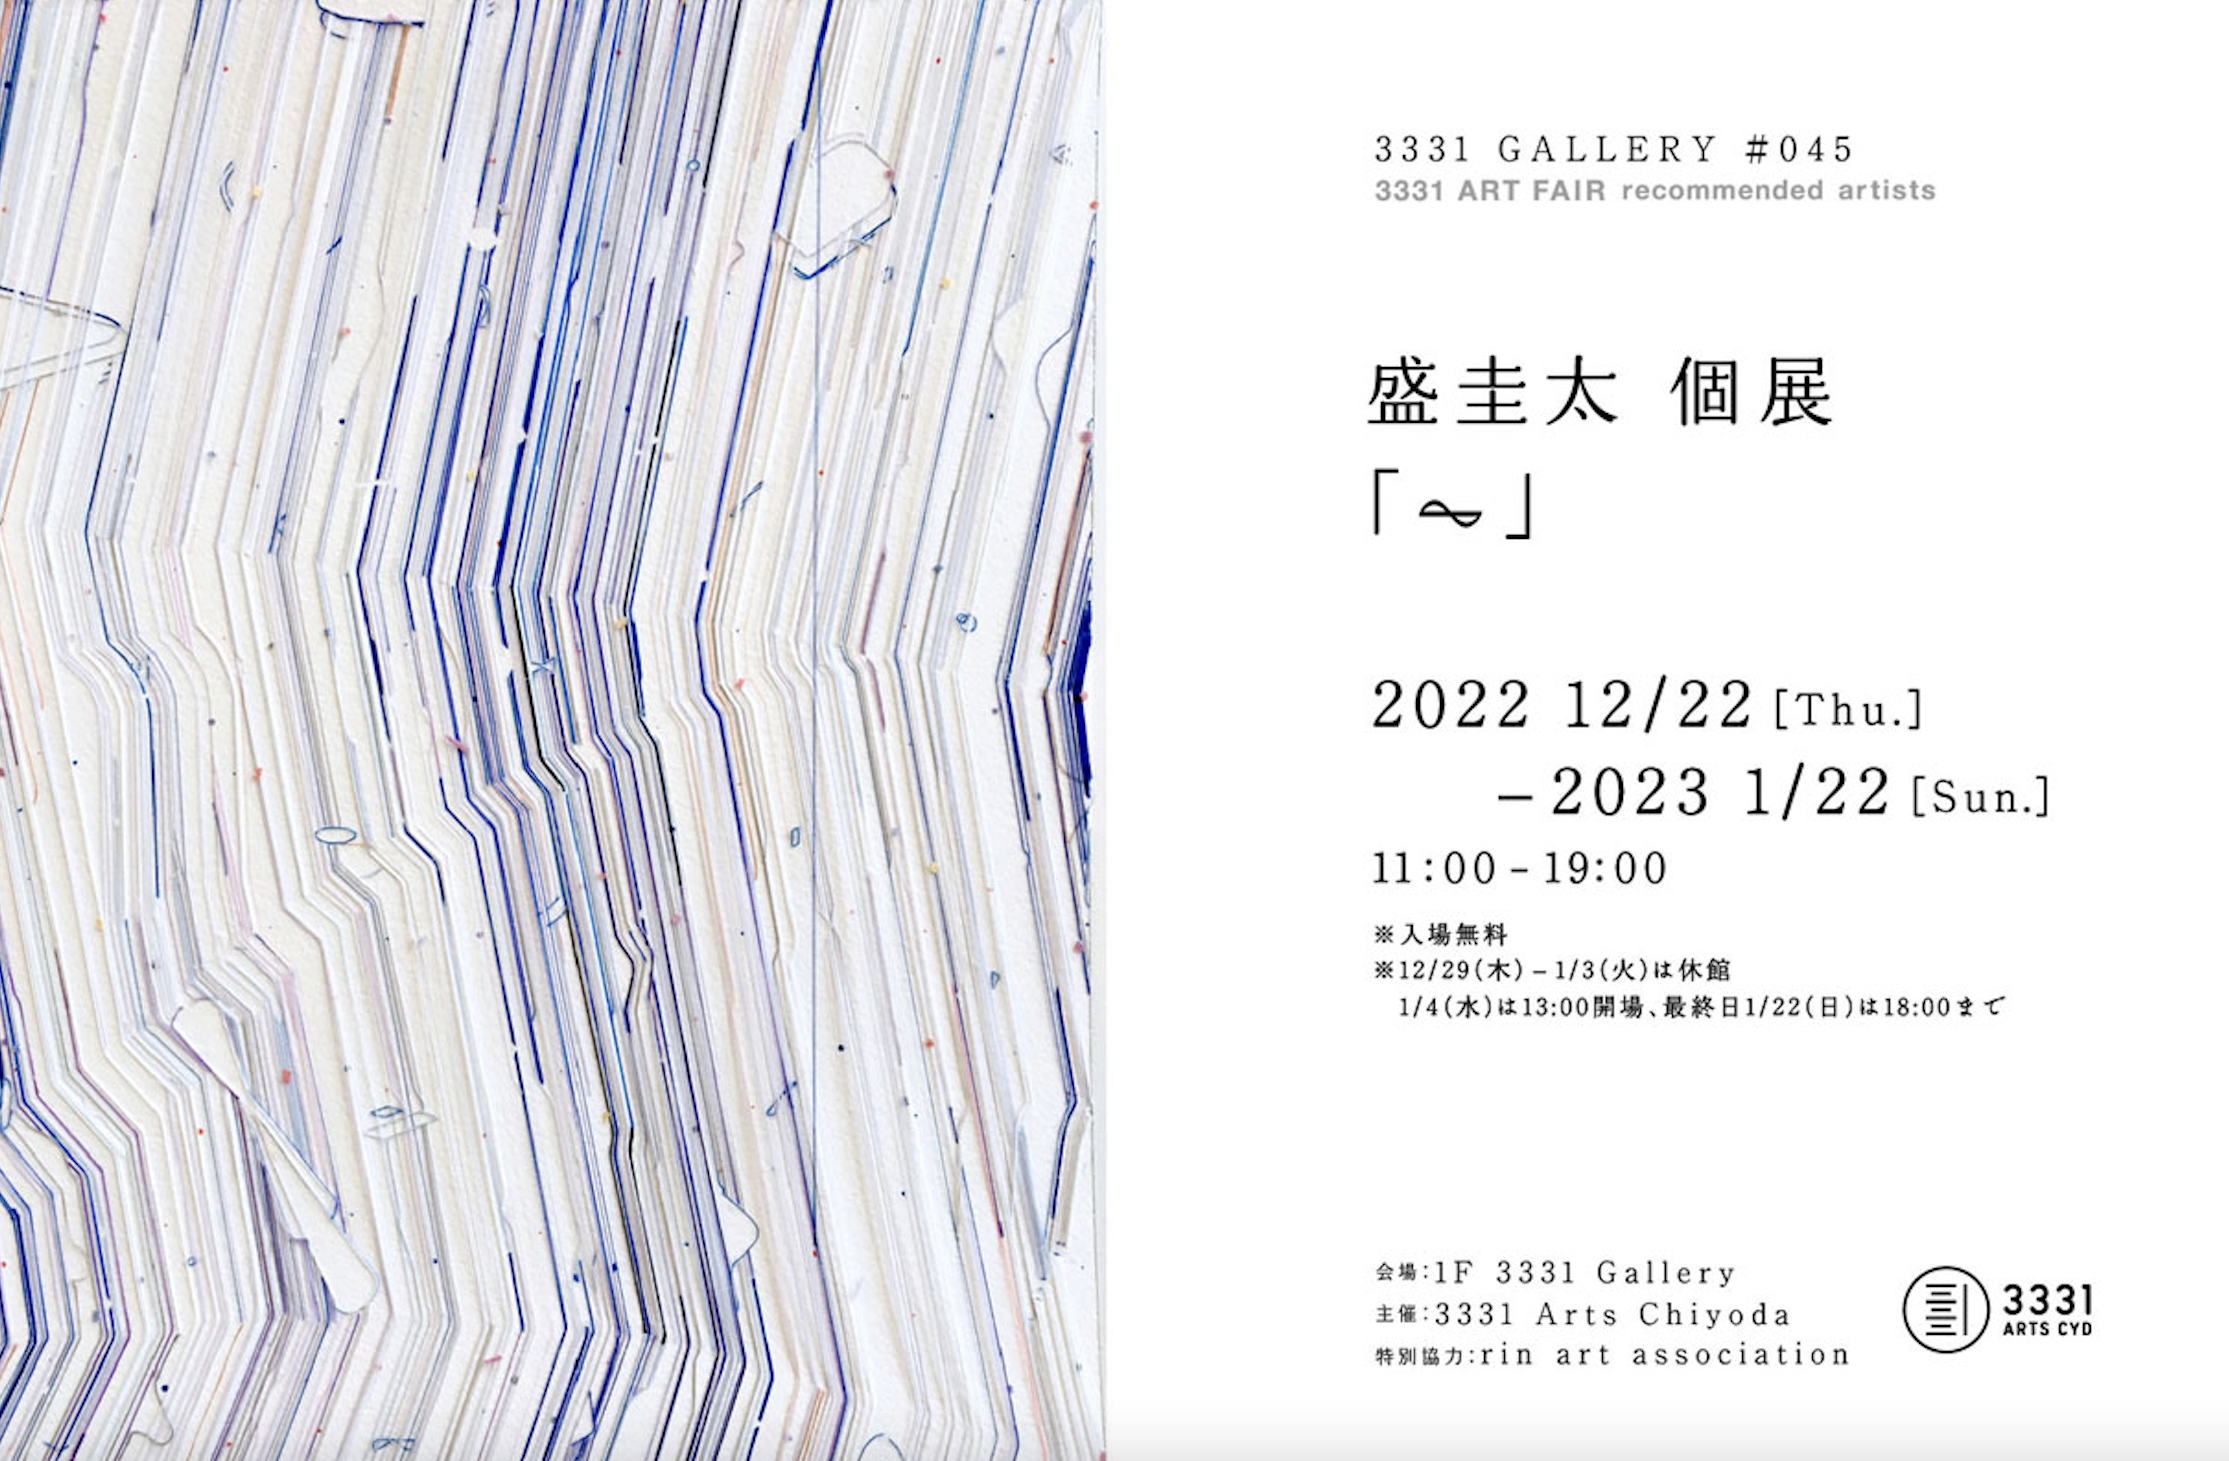 「3331 GALLERY #045 3331 ART FAIR recommended artists 盛 